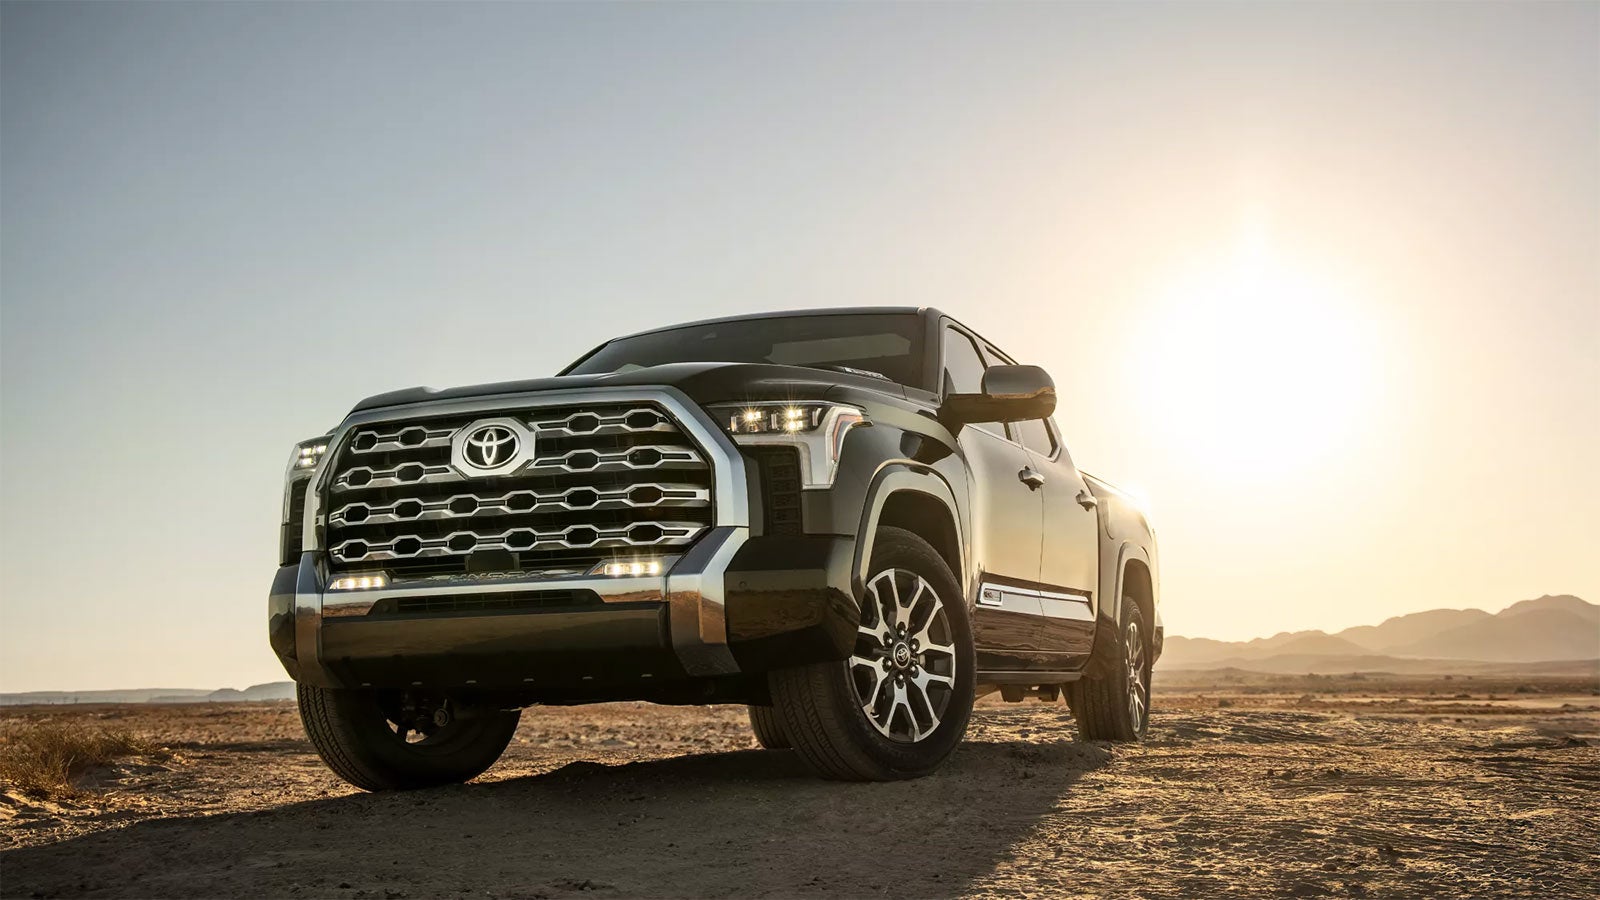 2022 Toyota Tundra Gallery | Midwest Toyota in Hutchinson KS